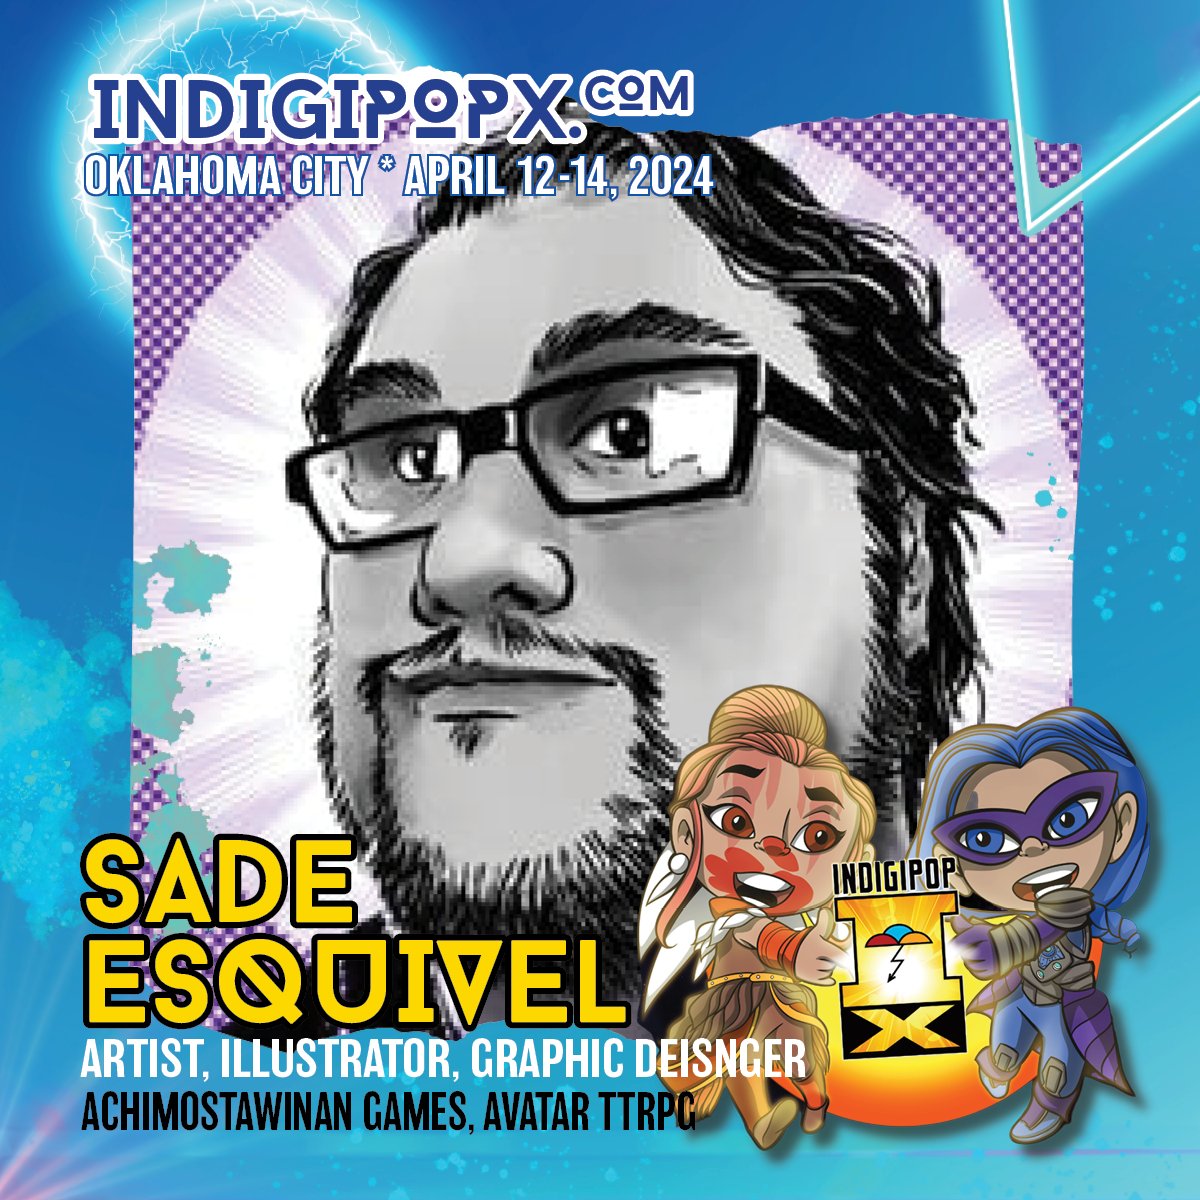 #IndigipopX2024 welcomes back Sadekaronhes Esquivel & Rising Sons Media, LLC! Sade is paneling, teaching and hosting a table in Artists Alley!

📍 @FAMokMuseum
📅 April 12-14, 2024
🎟️ indigipopx.com (tix + info)
#IPXatFAM #OKC #AttentionIndiginerds #NativeCreatives